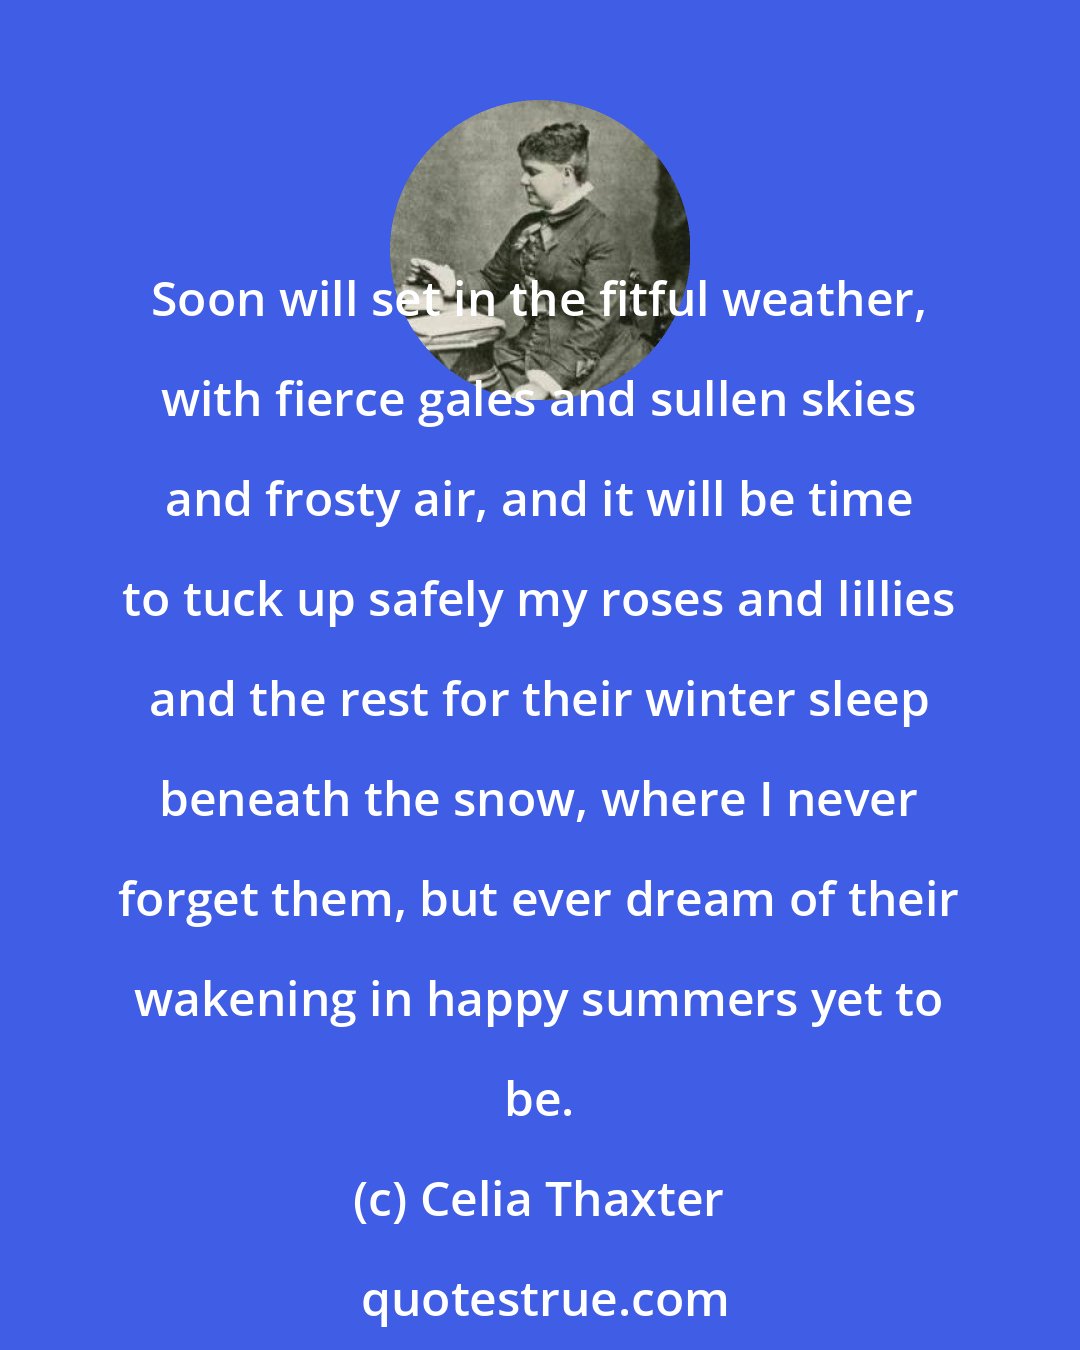 Celia Thaxter: Soon will set in the fitful weather, with fierce gales and sullen skies and frosty air, and it will be time to tuck up safely my roses and lillies and the rest for their winter sleep beneath the snow, where I never forget them, but ever dream of their wakening in happy summers yet to be.